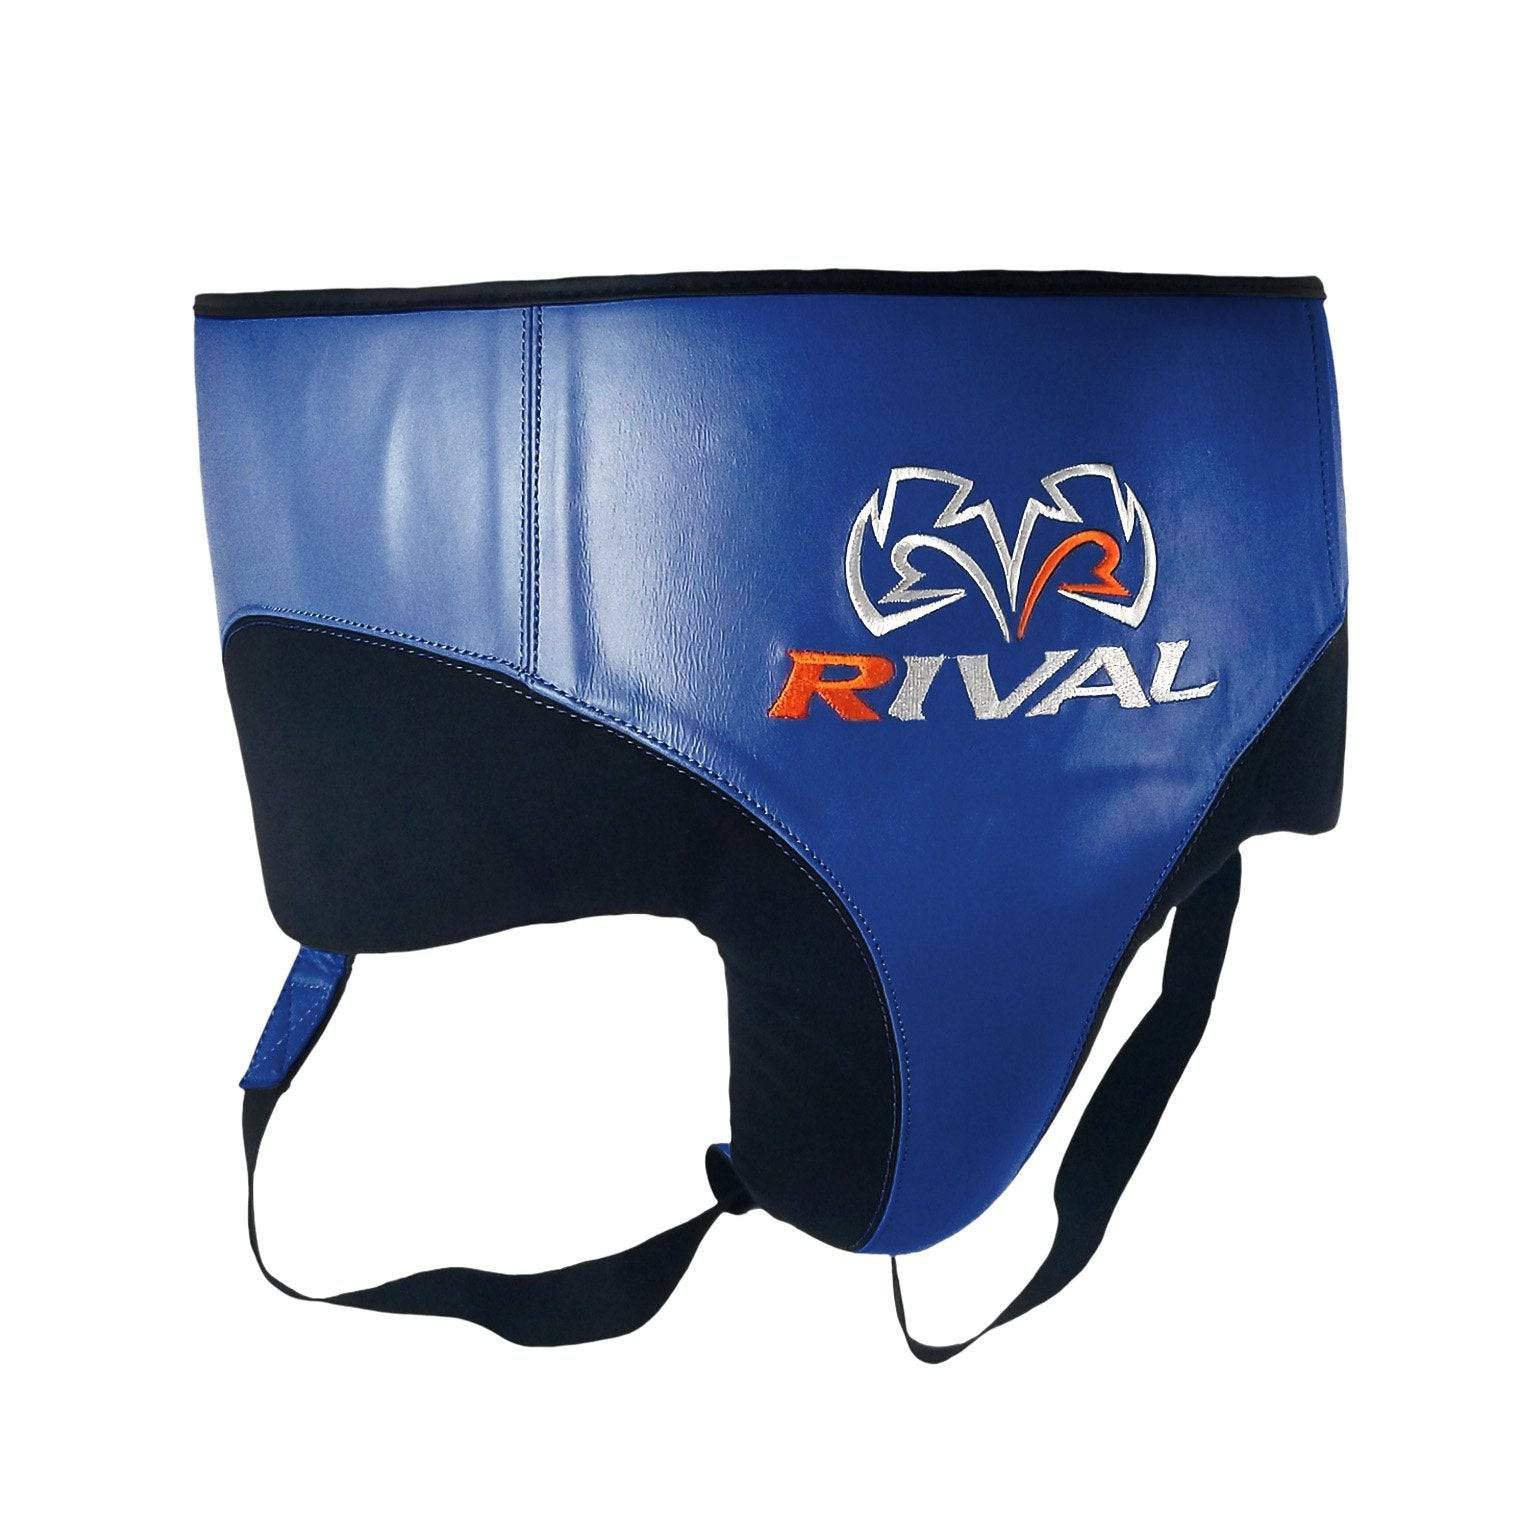 Rival | No Foul Protector - RNFL10 Protector 360 - XTC Fitness - Exercise Equipment Superstore - Canada - Groin Protection